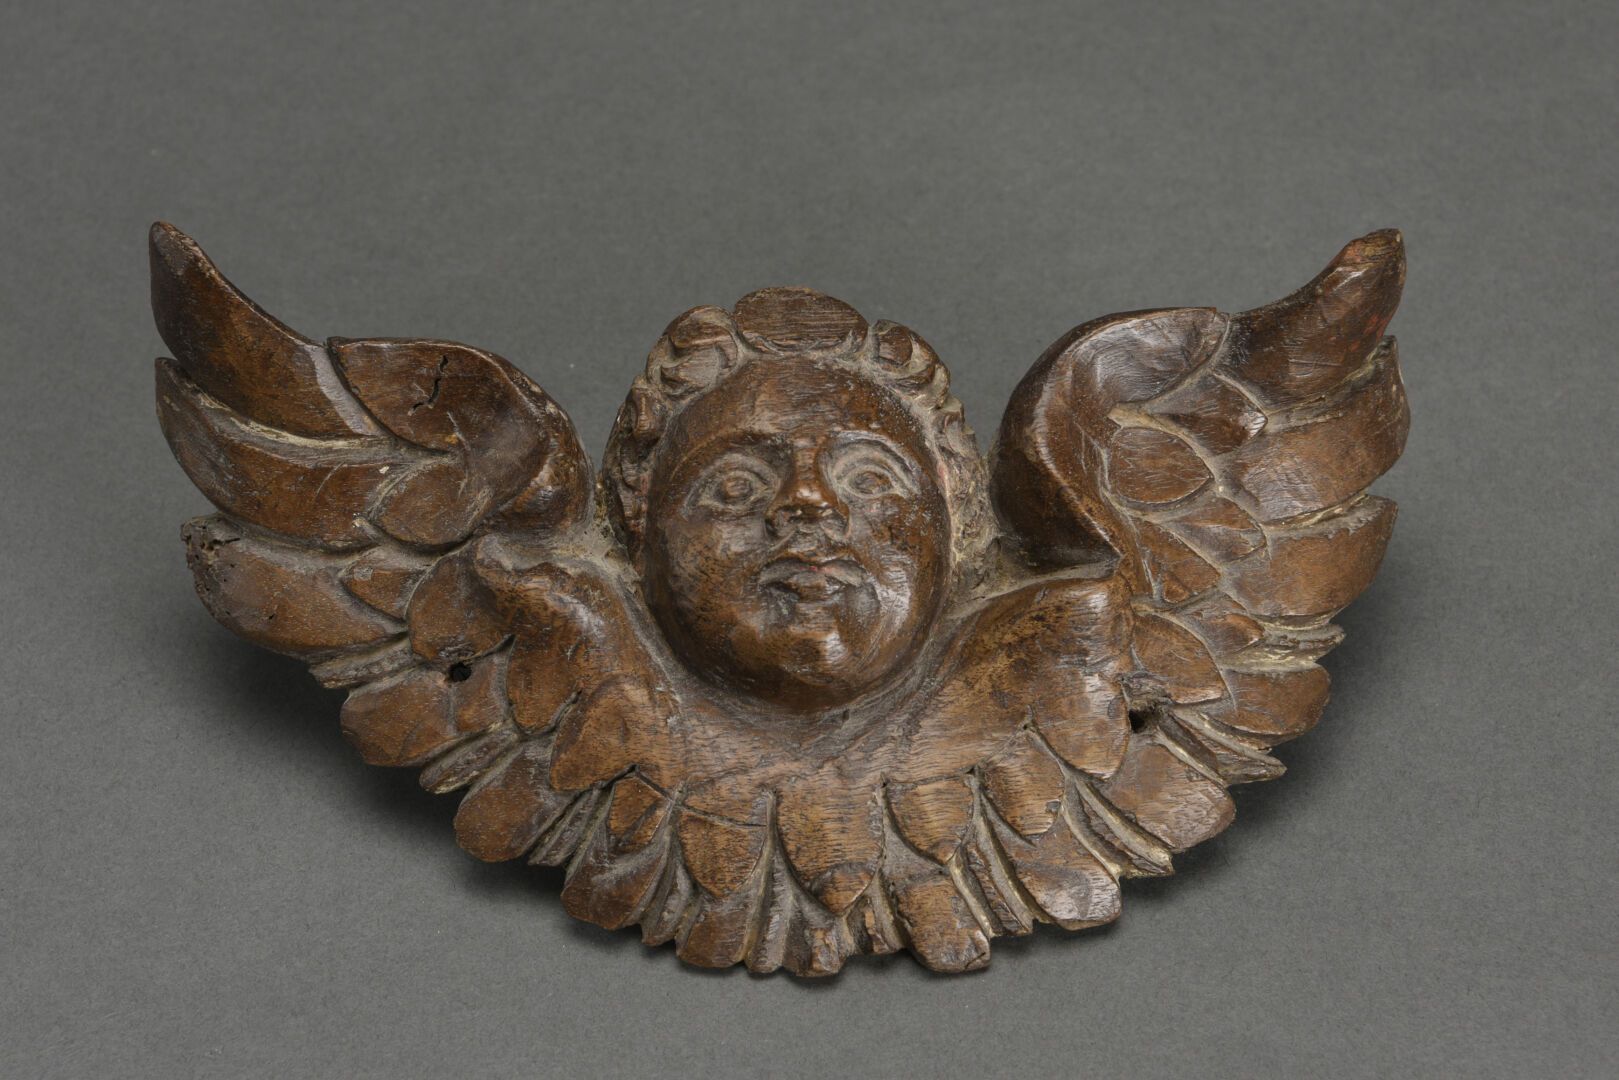 Null Head of a winged putto in carved wood
18th century 
H: 126 L: 2 cm